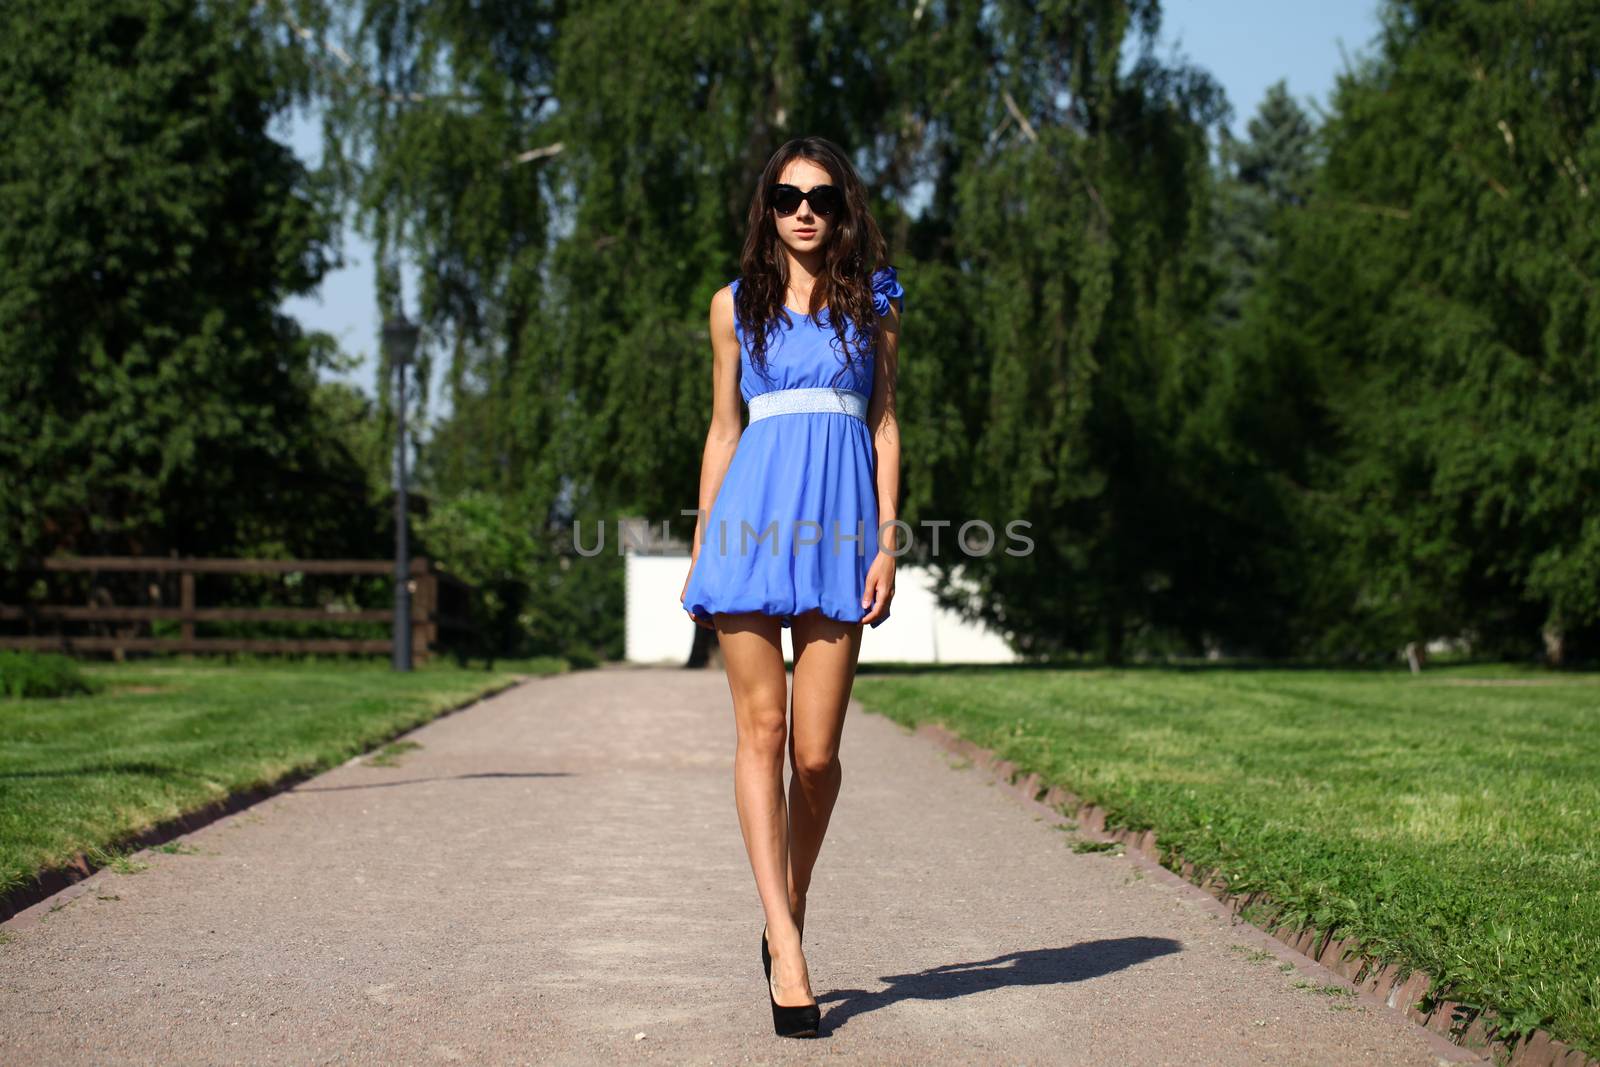 Beautiful young woman walking on the summer park